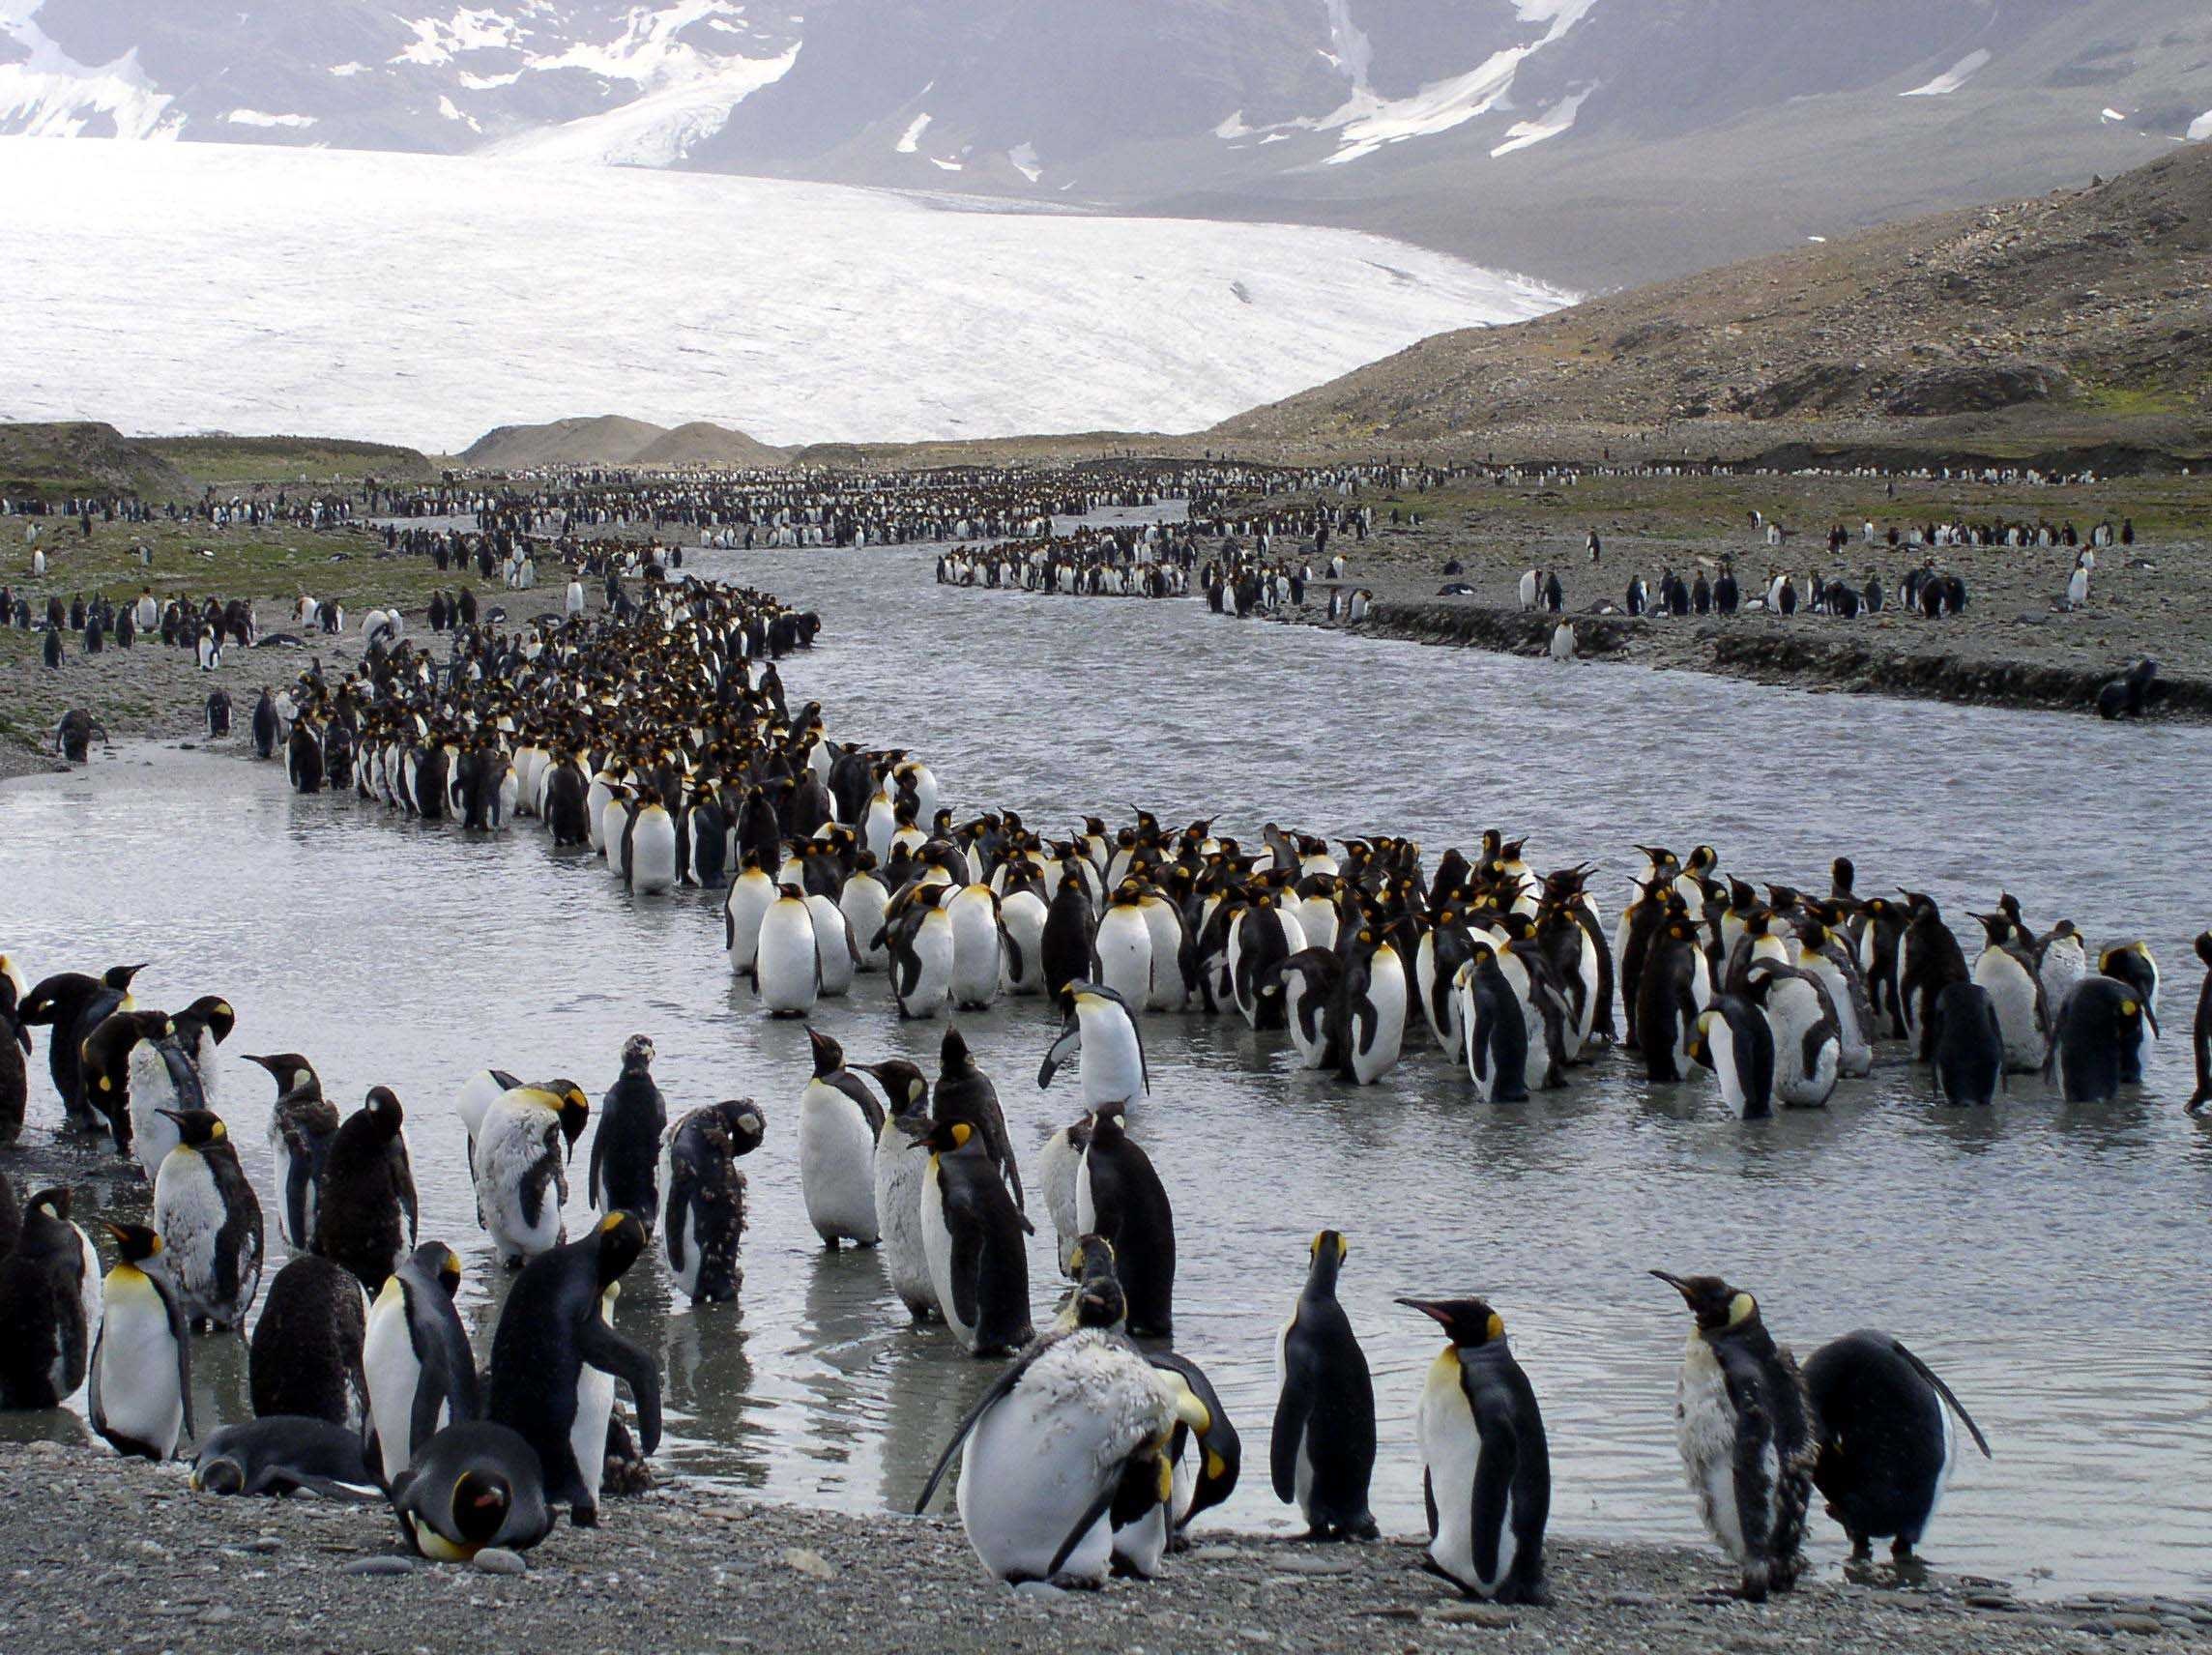 King penguin image classifcation dataset for machine learning